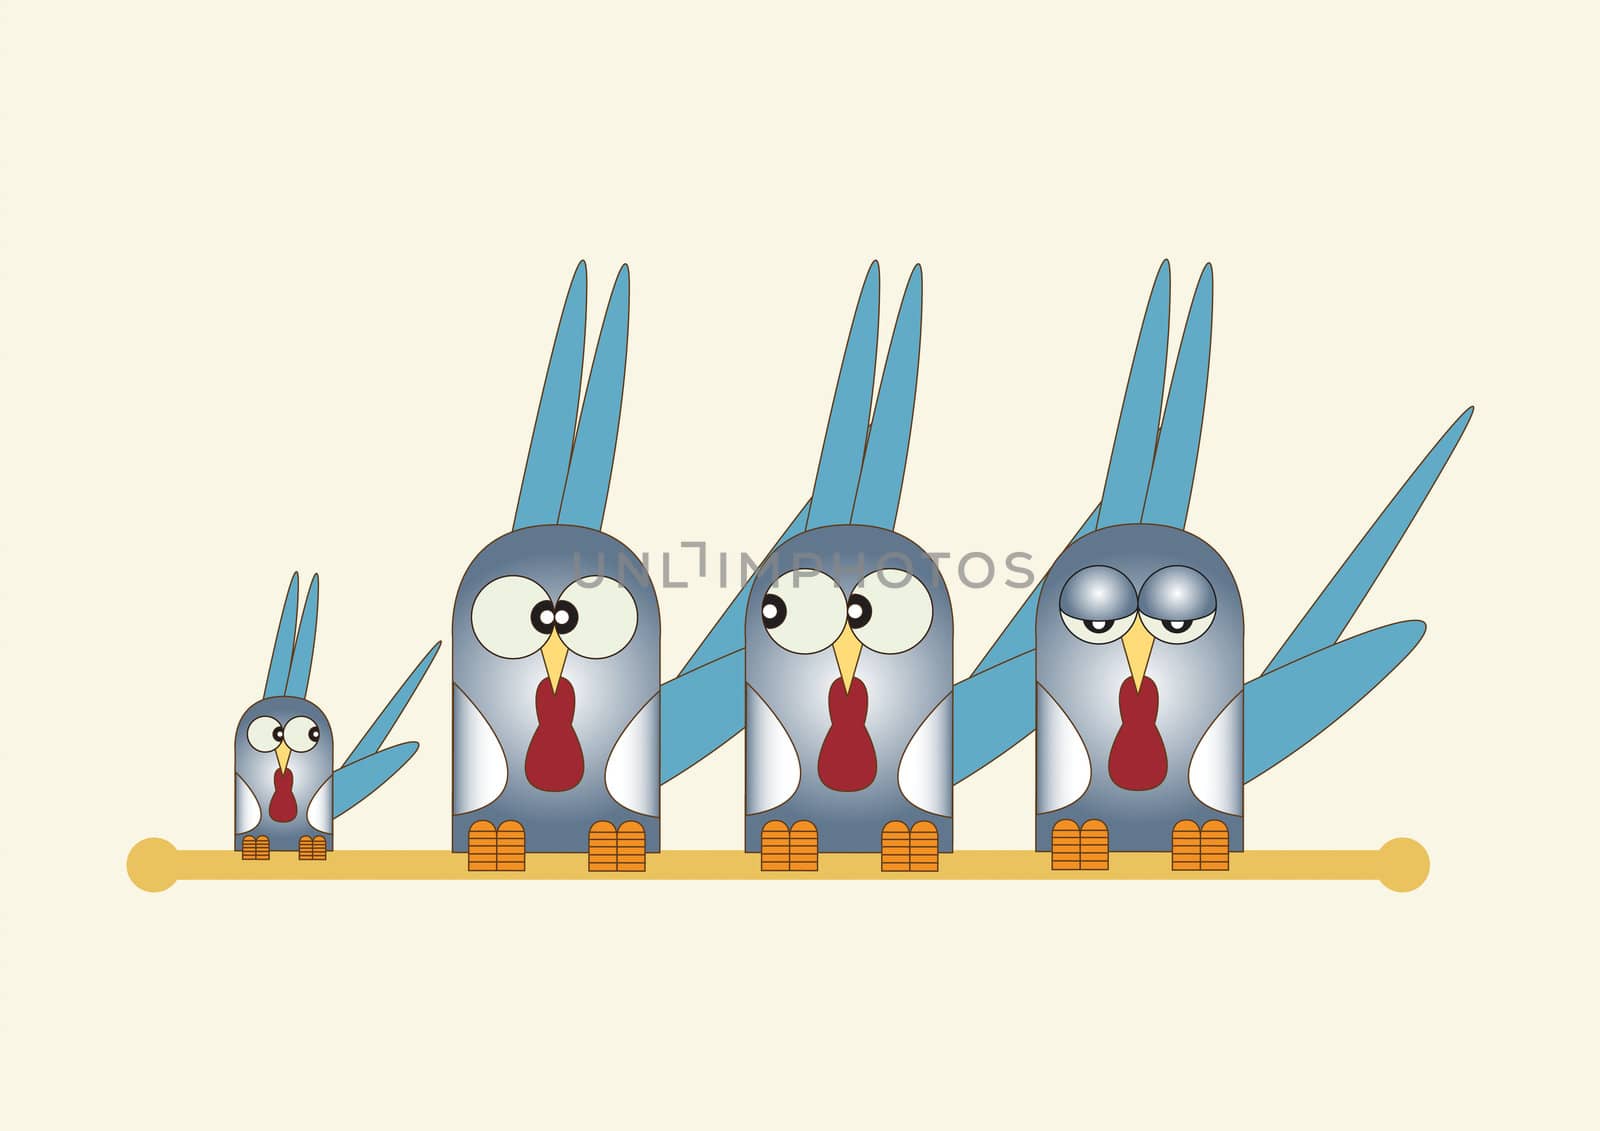 A Hand drawn Illustration of four blue coloured stylized birds with blue head and tail feathers, perched side by side on a pole. Set on a plain cream background.